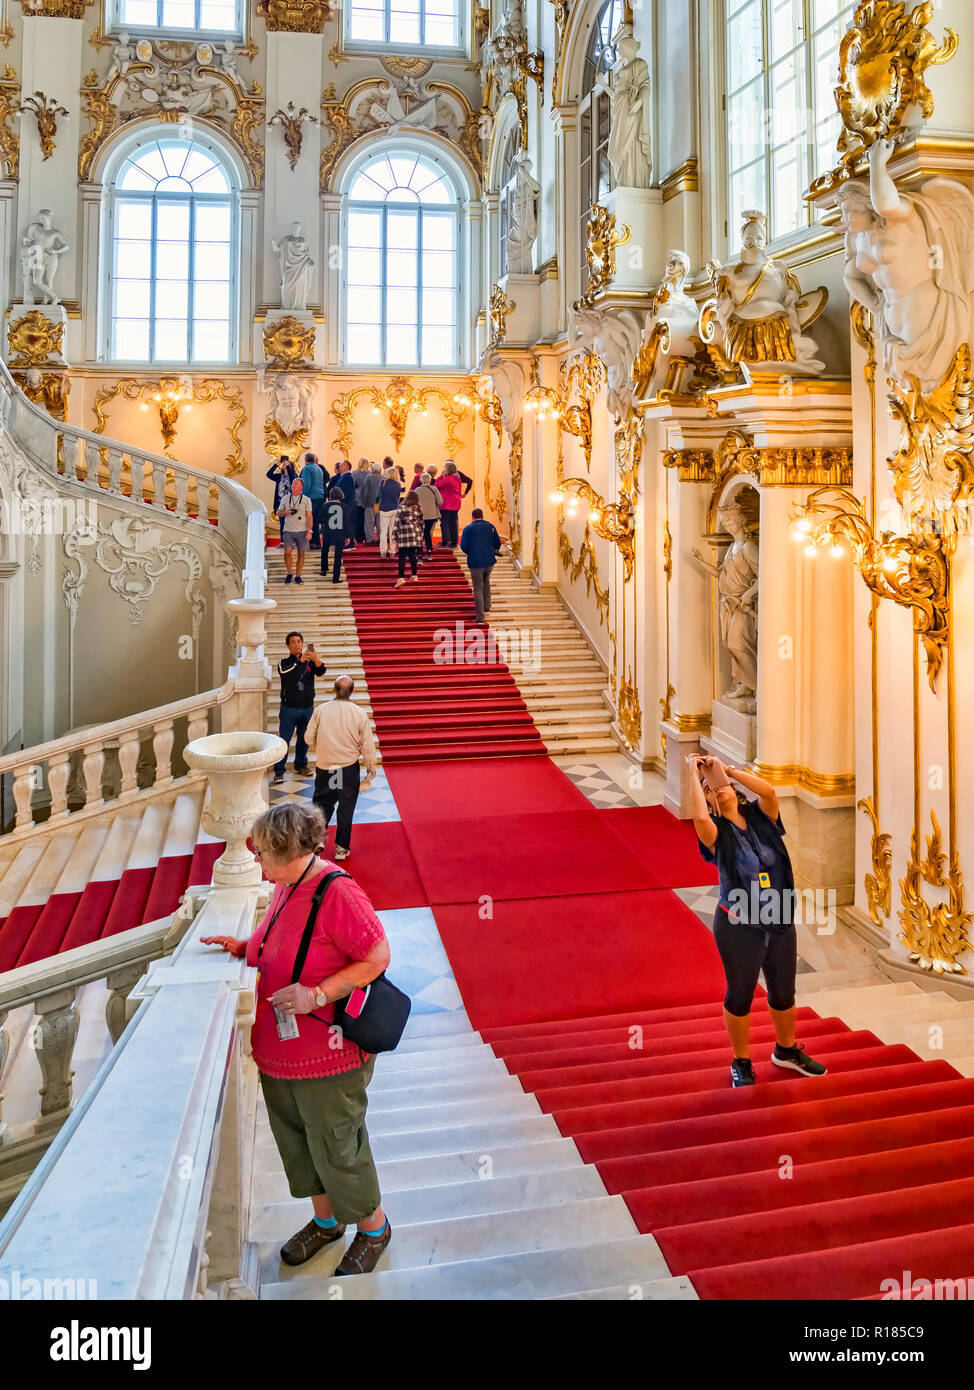 19 September 2018: St Petersburg, Russia - Tour parties on the main stairs of the Hermitage Museum. Stock Photo